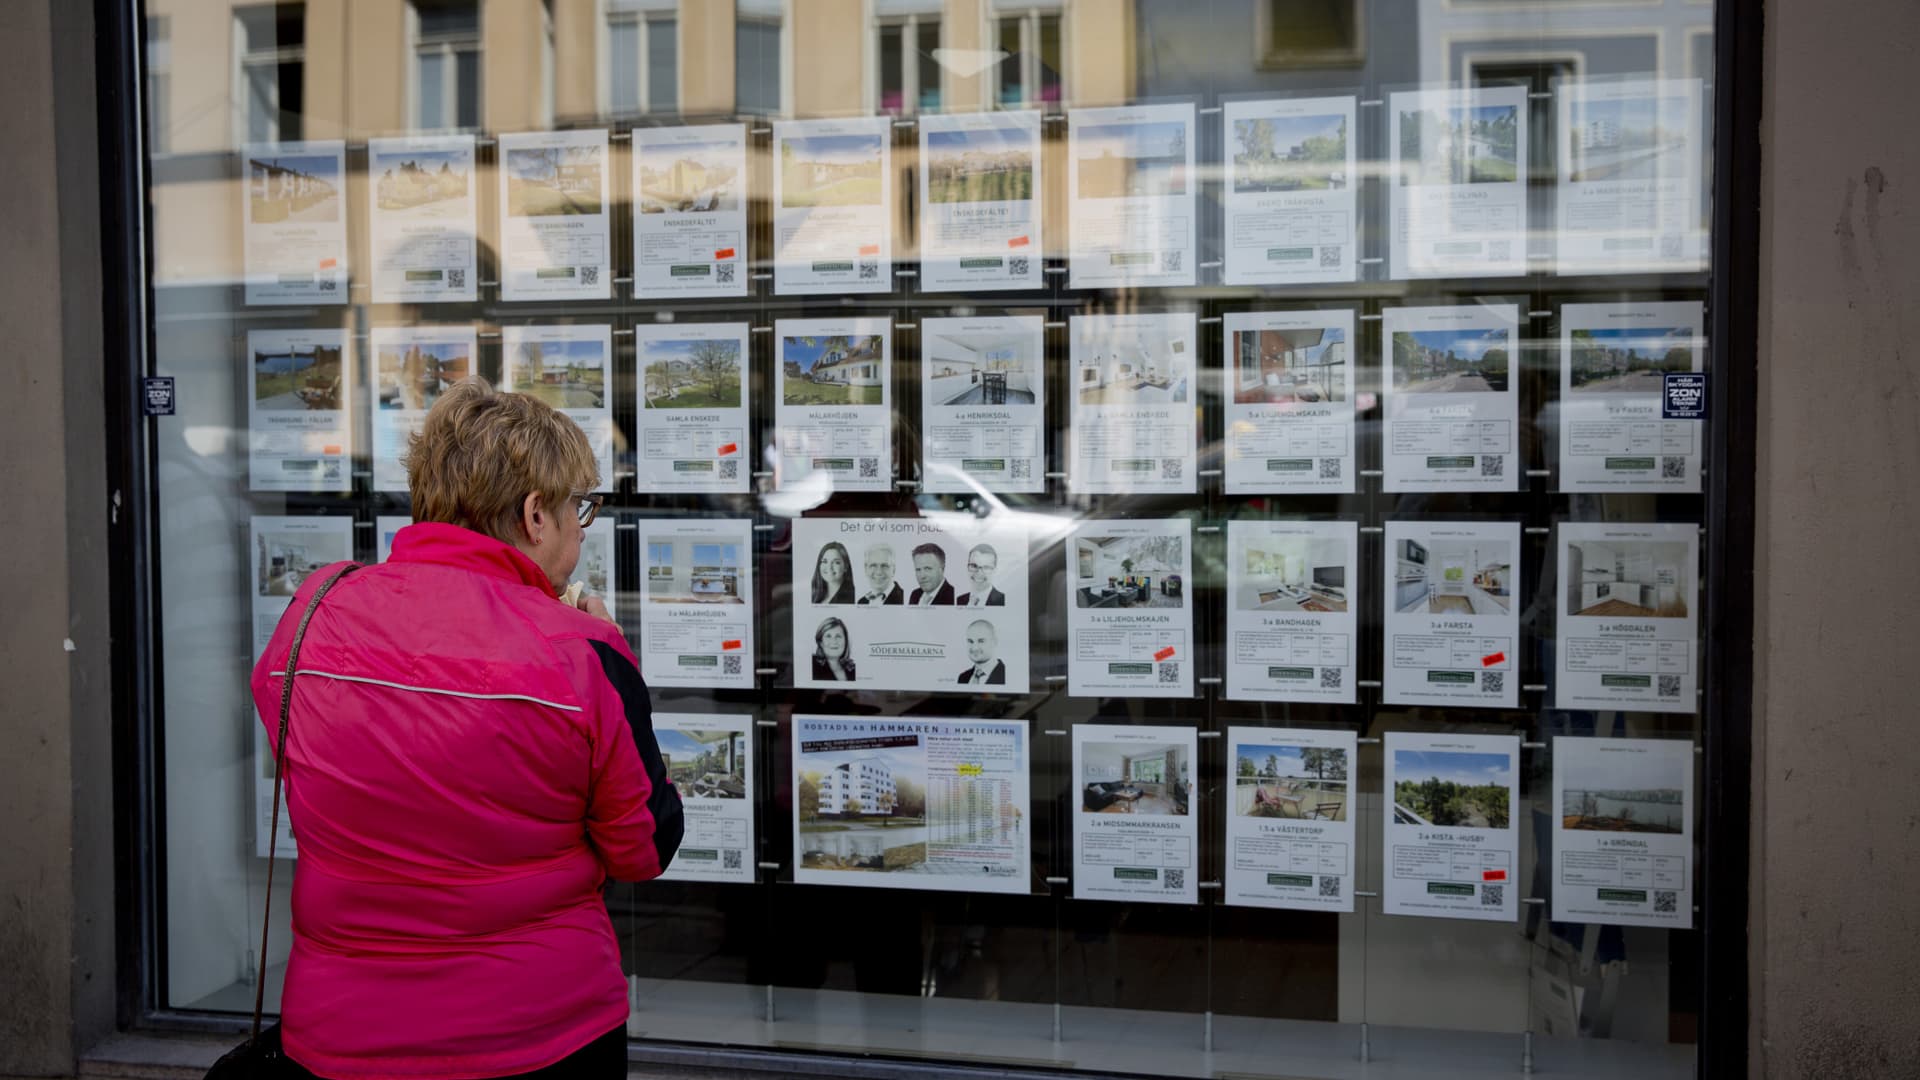 IMF warns of 'disorderly' house price corrections in Europe amid high rates